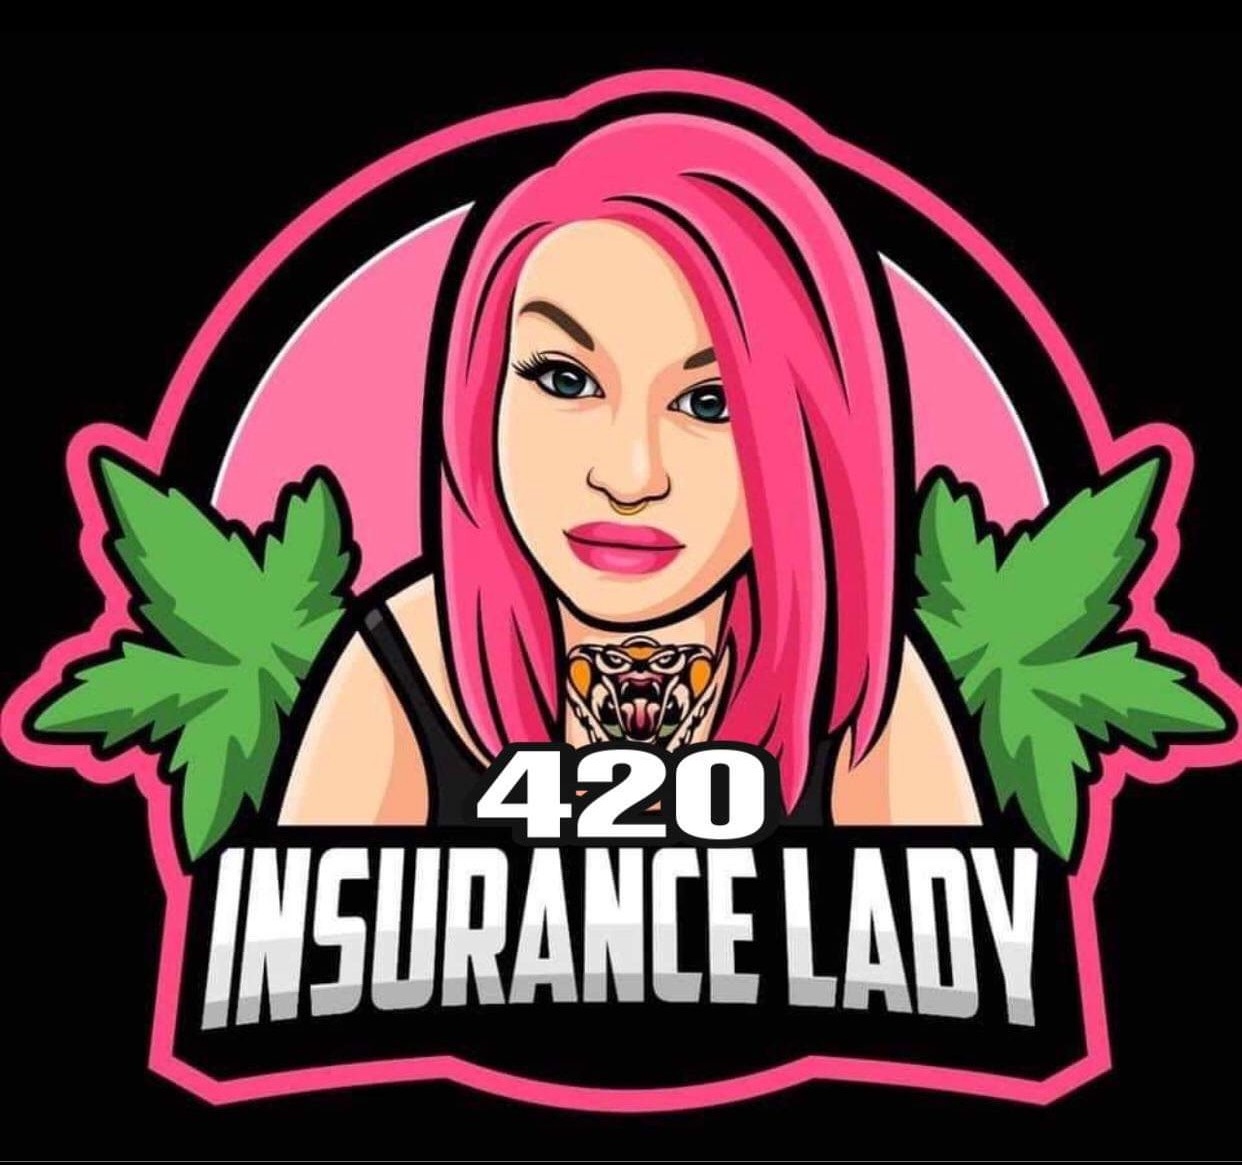 The “420 Insurance Lady” Deep Dives Into the Rise of Cannabis Insurance